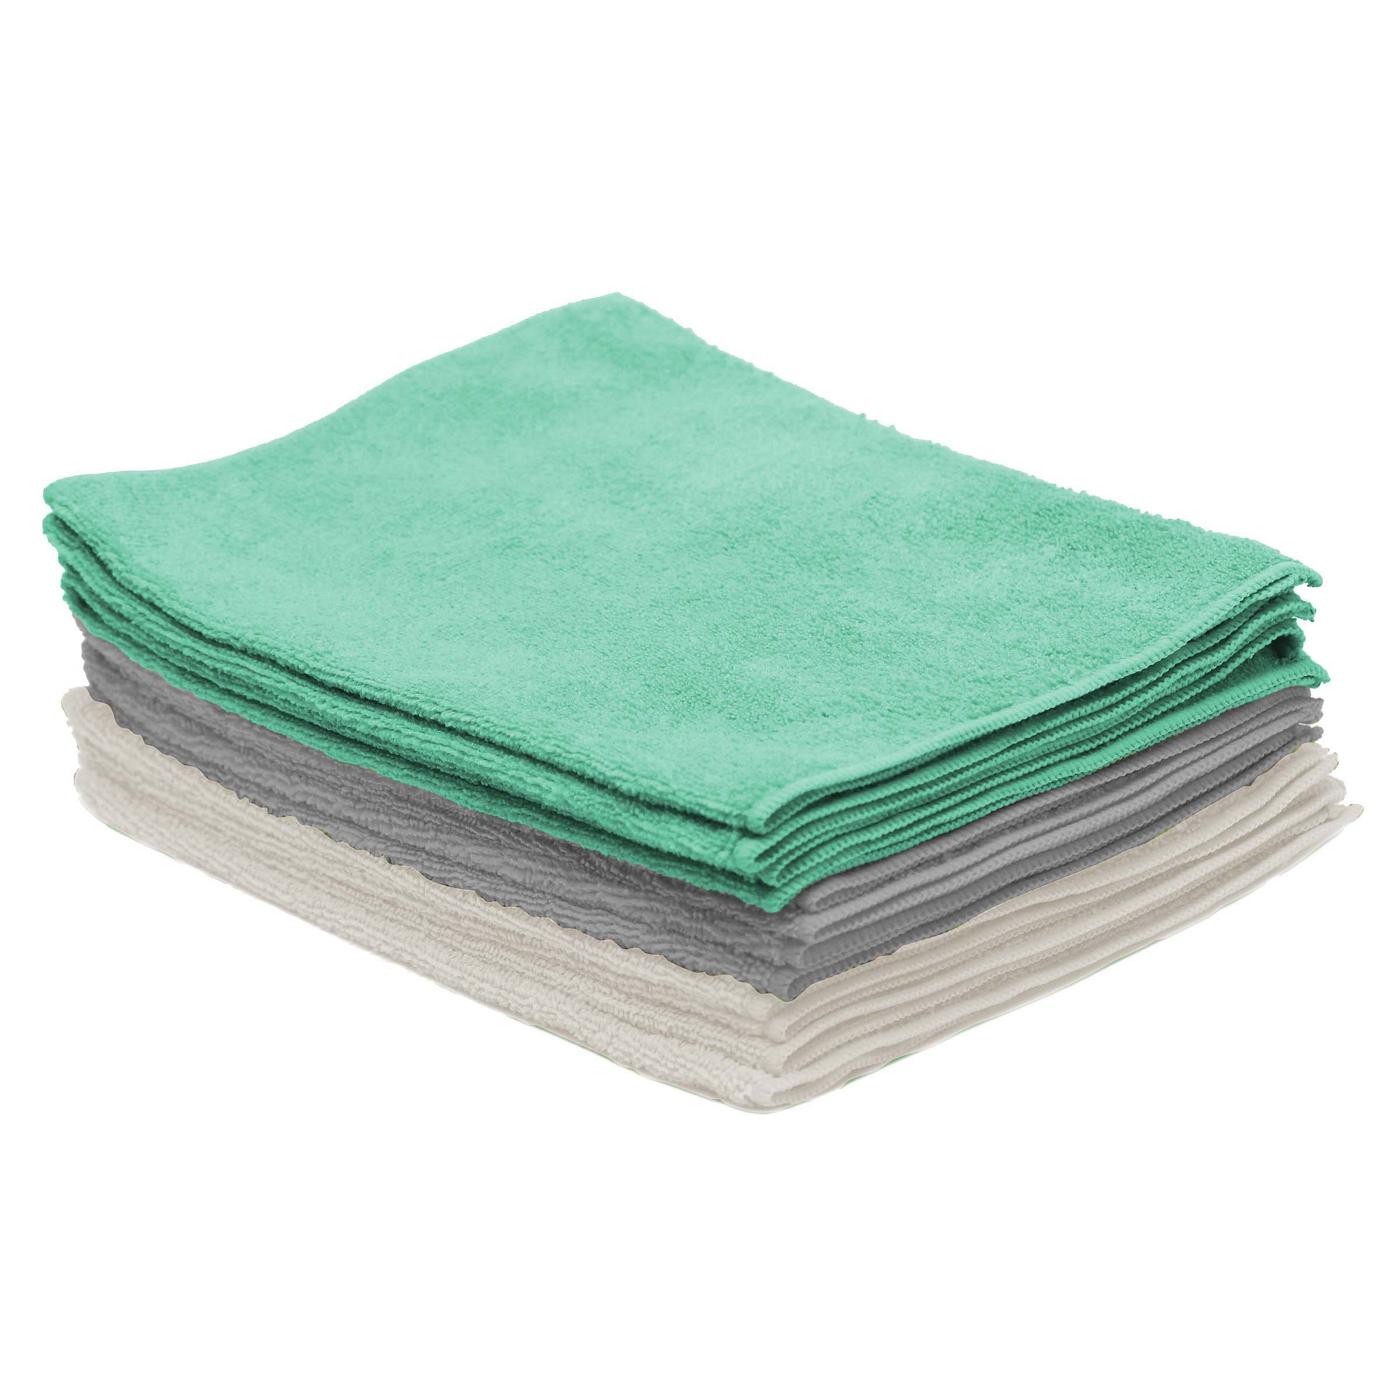 S & T Inc Assorted Color Microfiber Cleaning Cloths; image 2 of 3